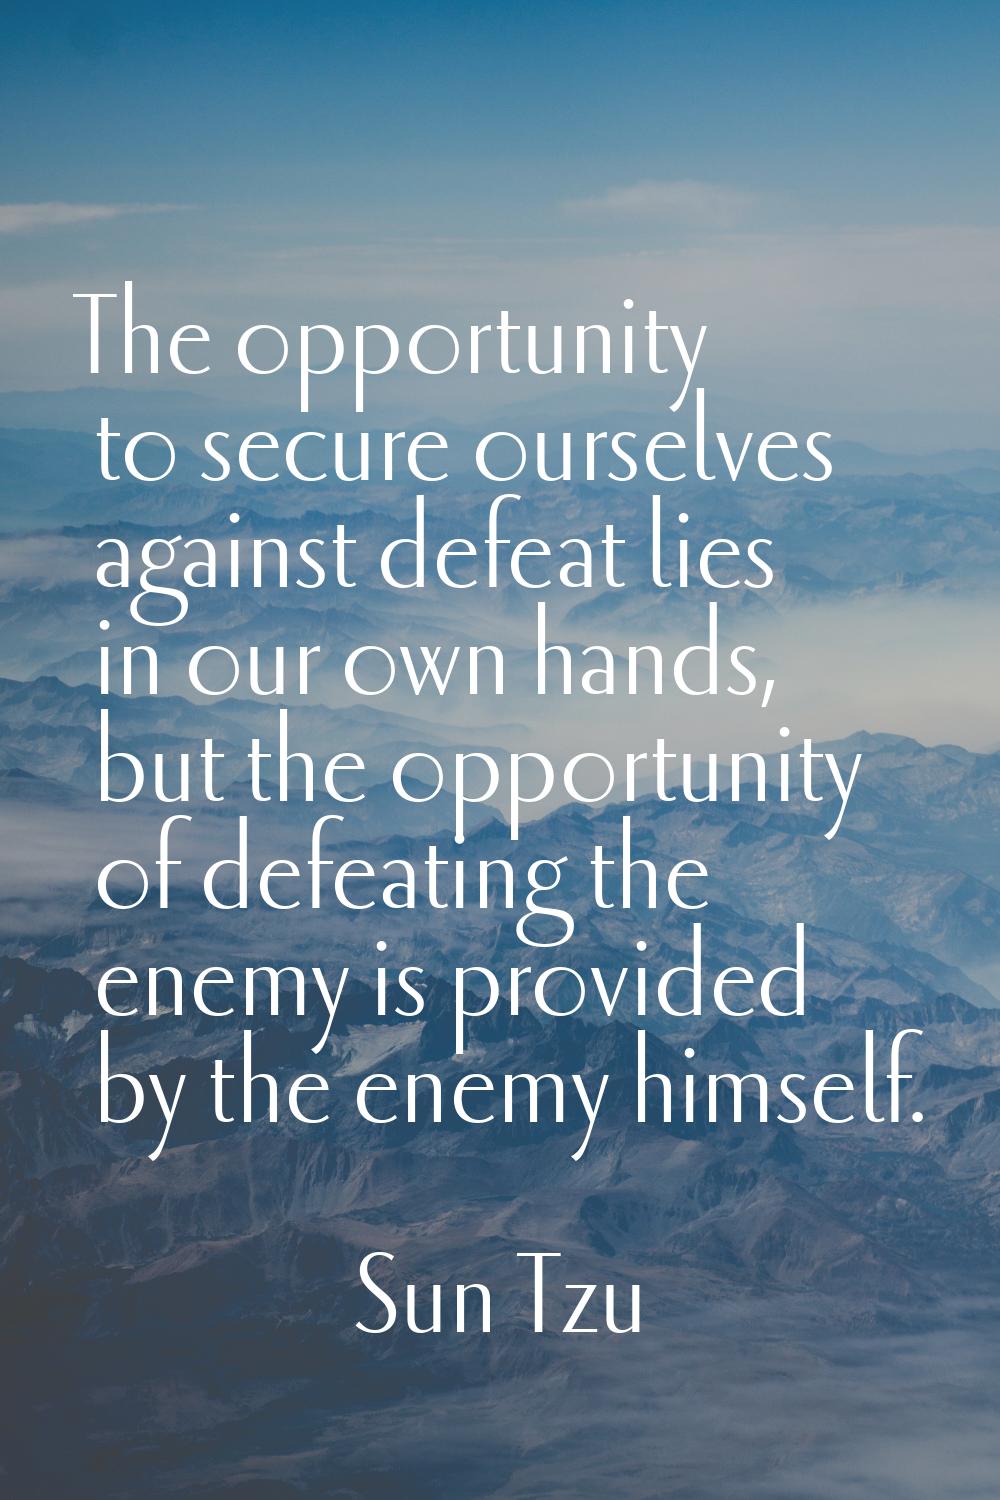 The opportunity to secure ourselves against defeat lies in our own hands, but the opportunity of de